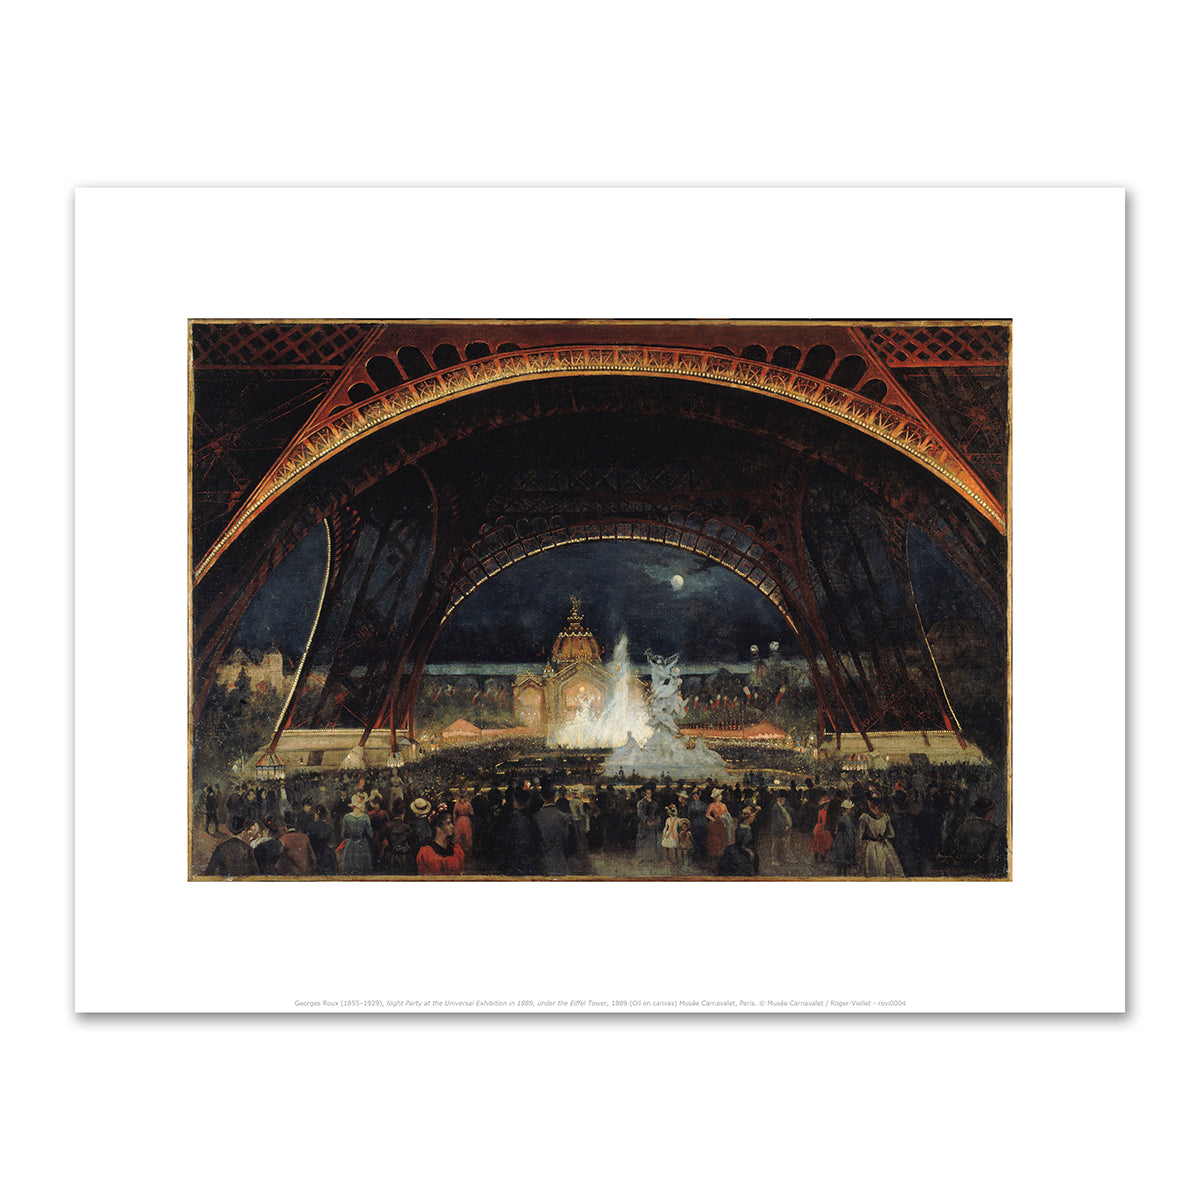 THE UNIVERSAL FAVORITE. Lithograph, 1889 For sale as Framed Prints